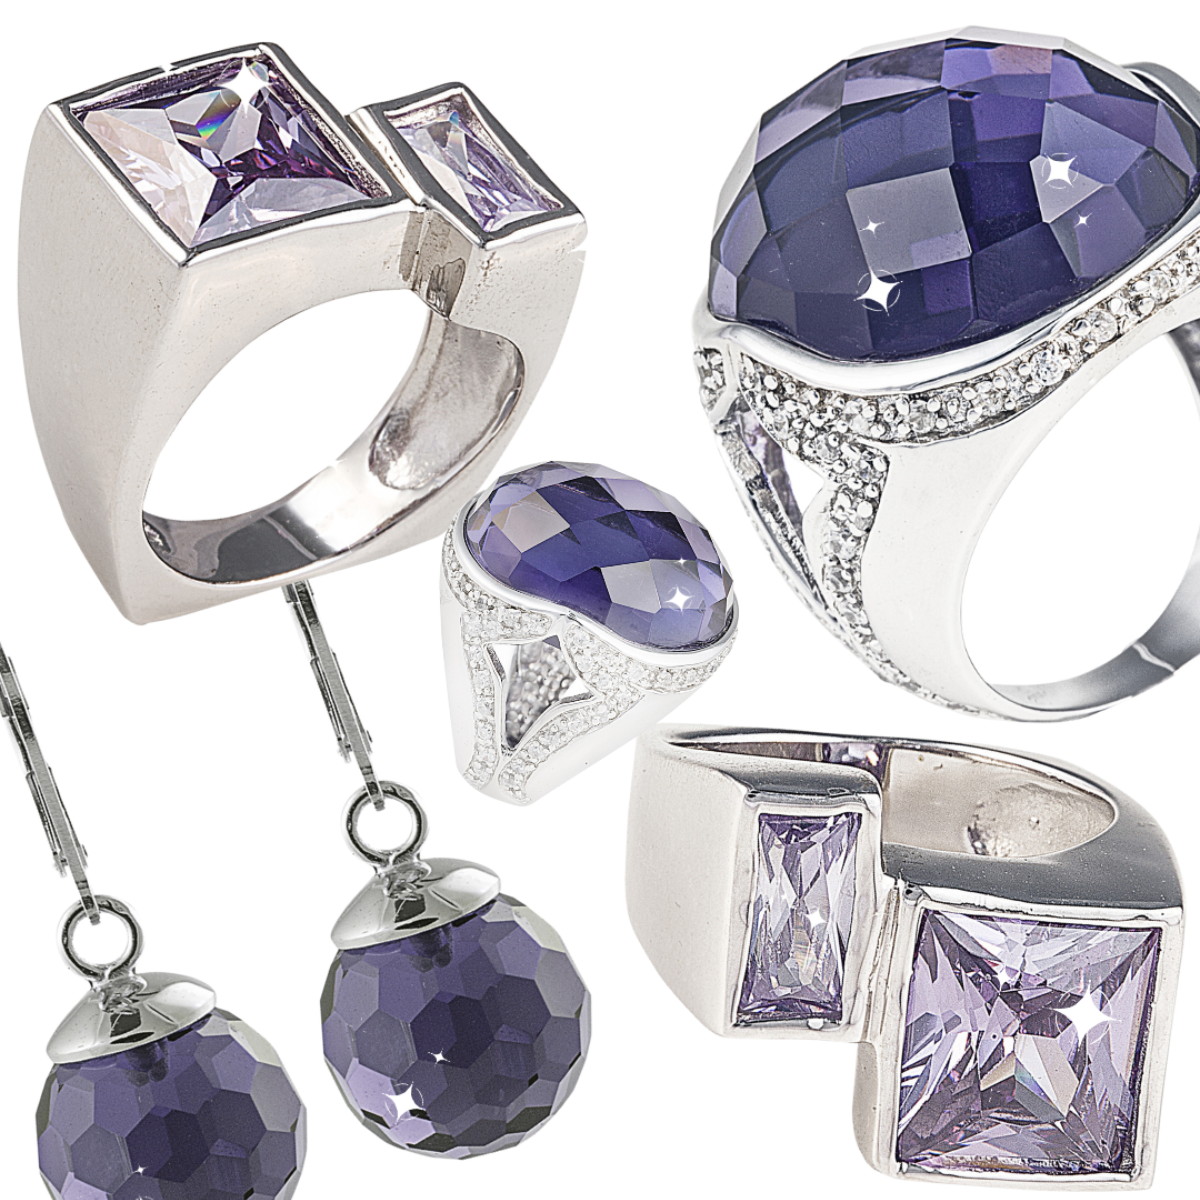 Shop beautiful Bellagio & Co jewellery with lavender / purple-coloured stones. Worldwide shipping from Australia